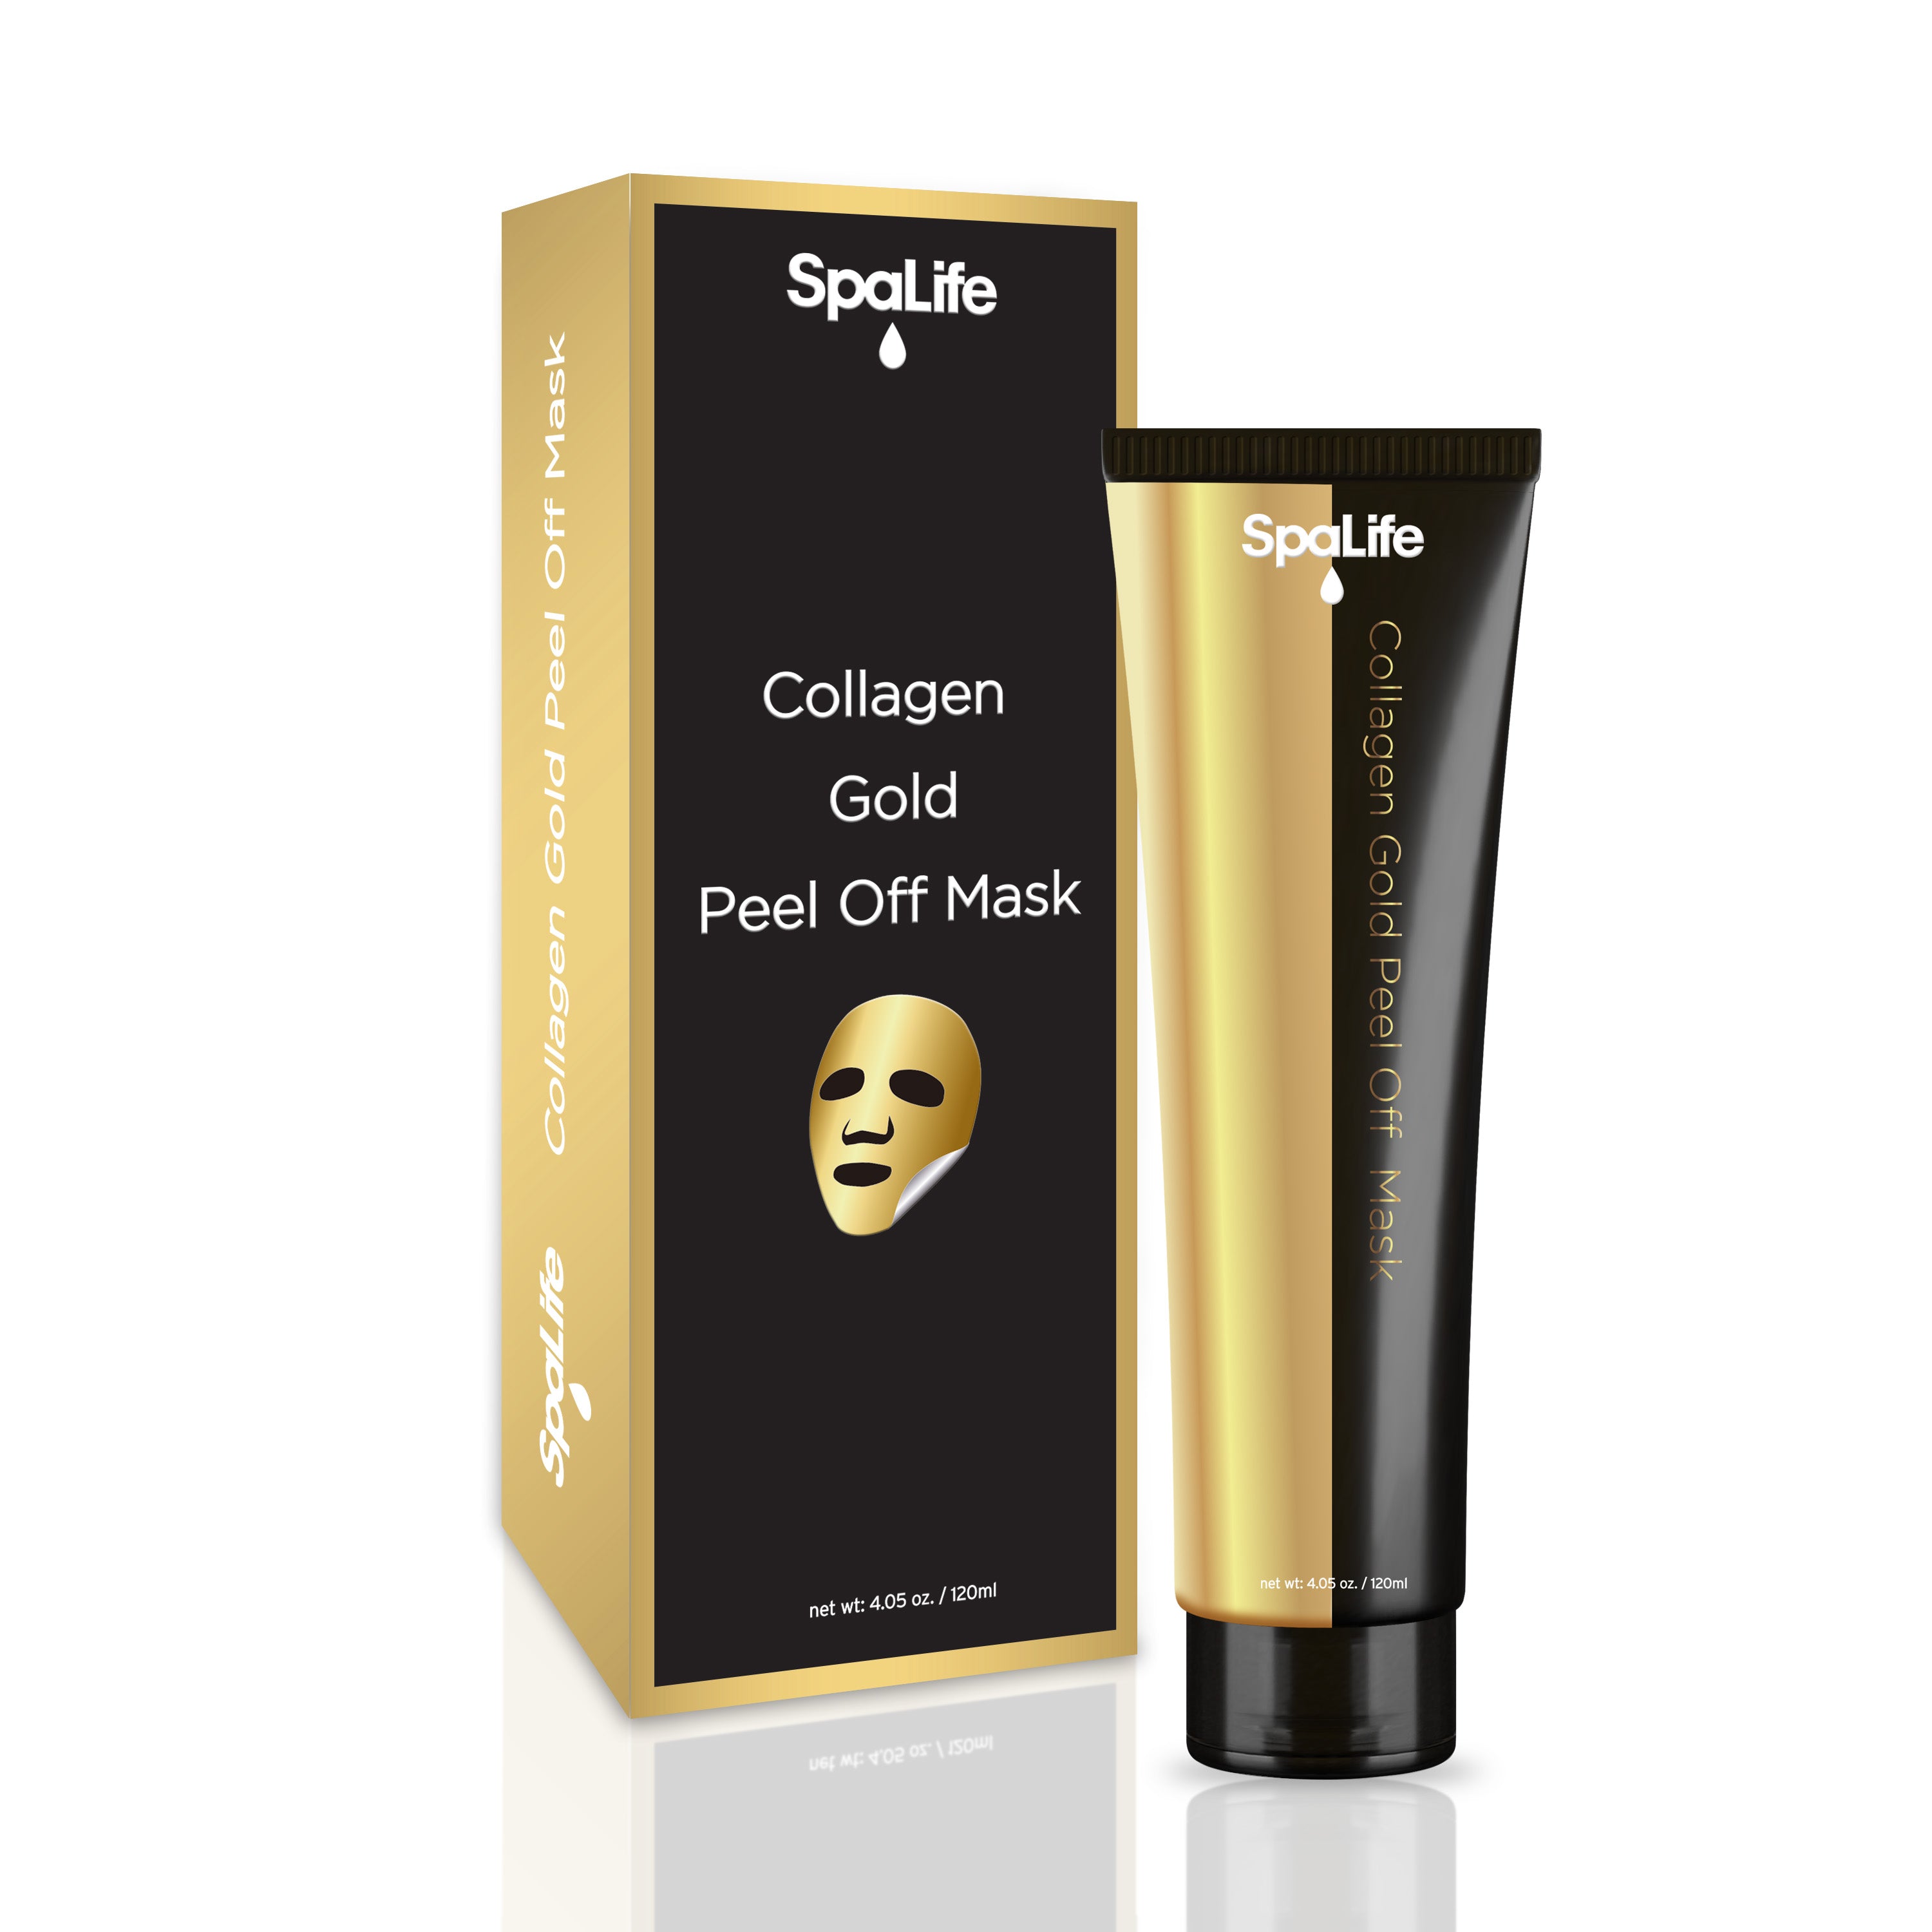 Spa life collagen gold peel off mask